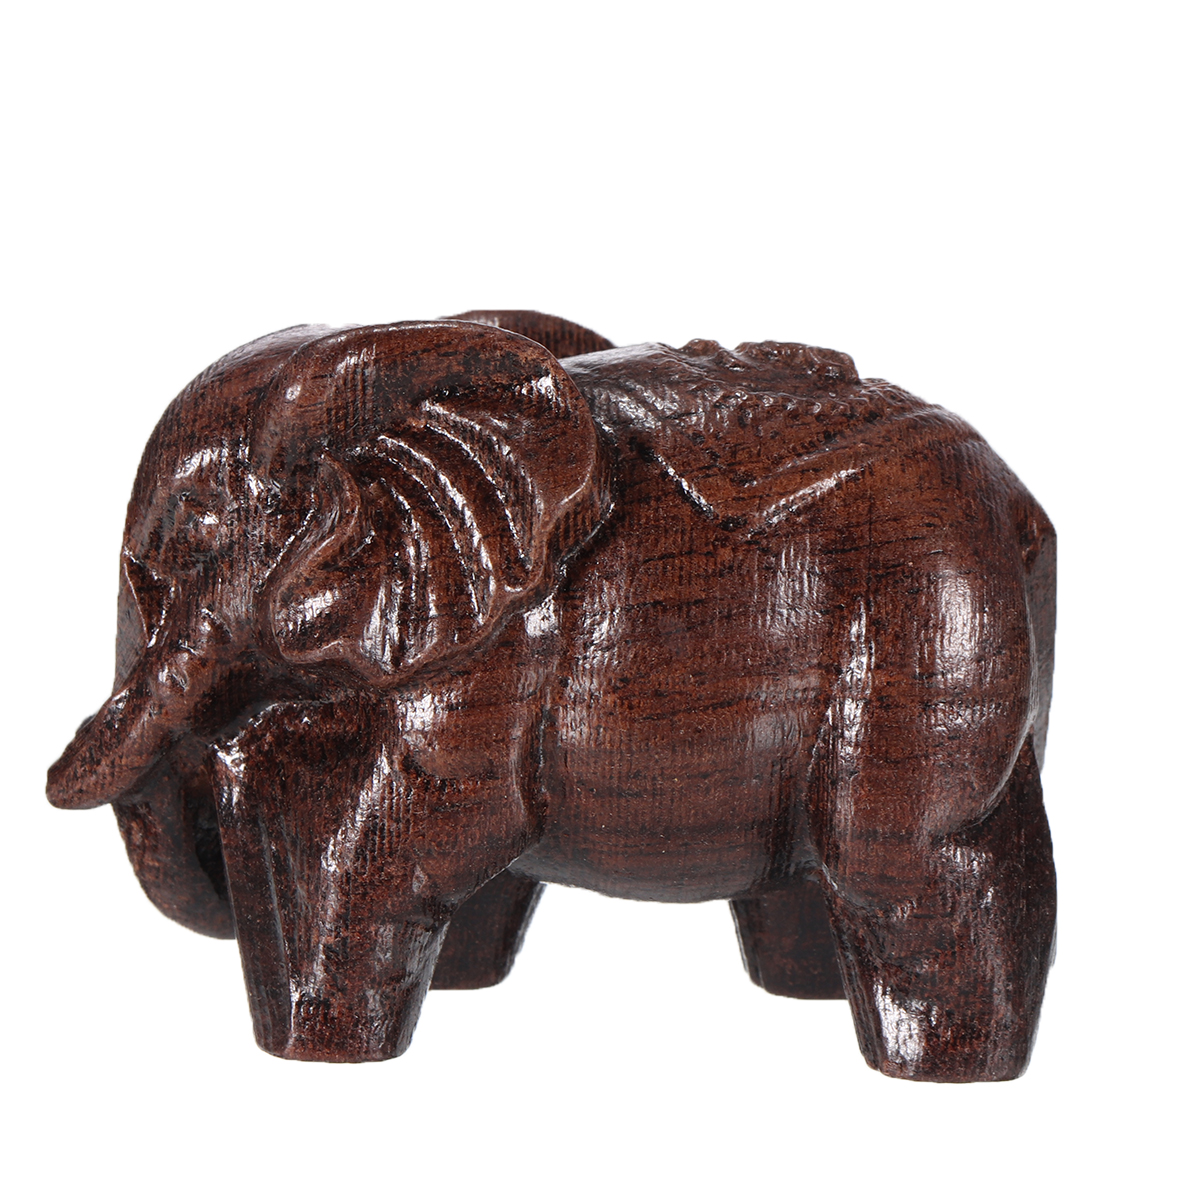 1-Pair-Natural-Agarwood-Elephant-Wood-Carving-Wood-Crafts-Retro-Decoration-Craft-Creative-Gifts-Home-1759099-3